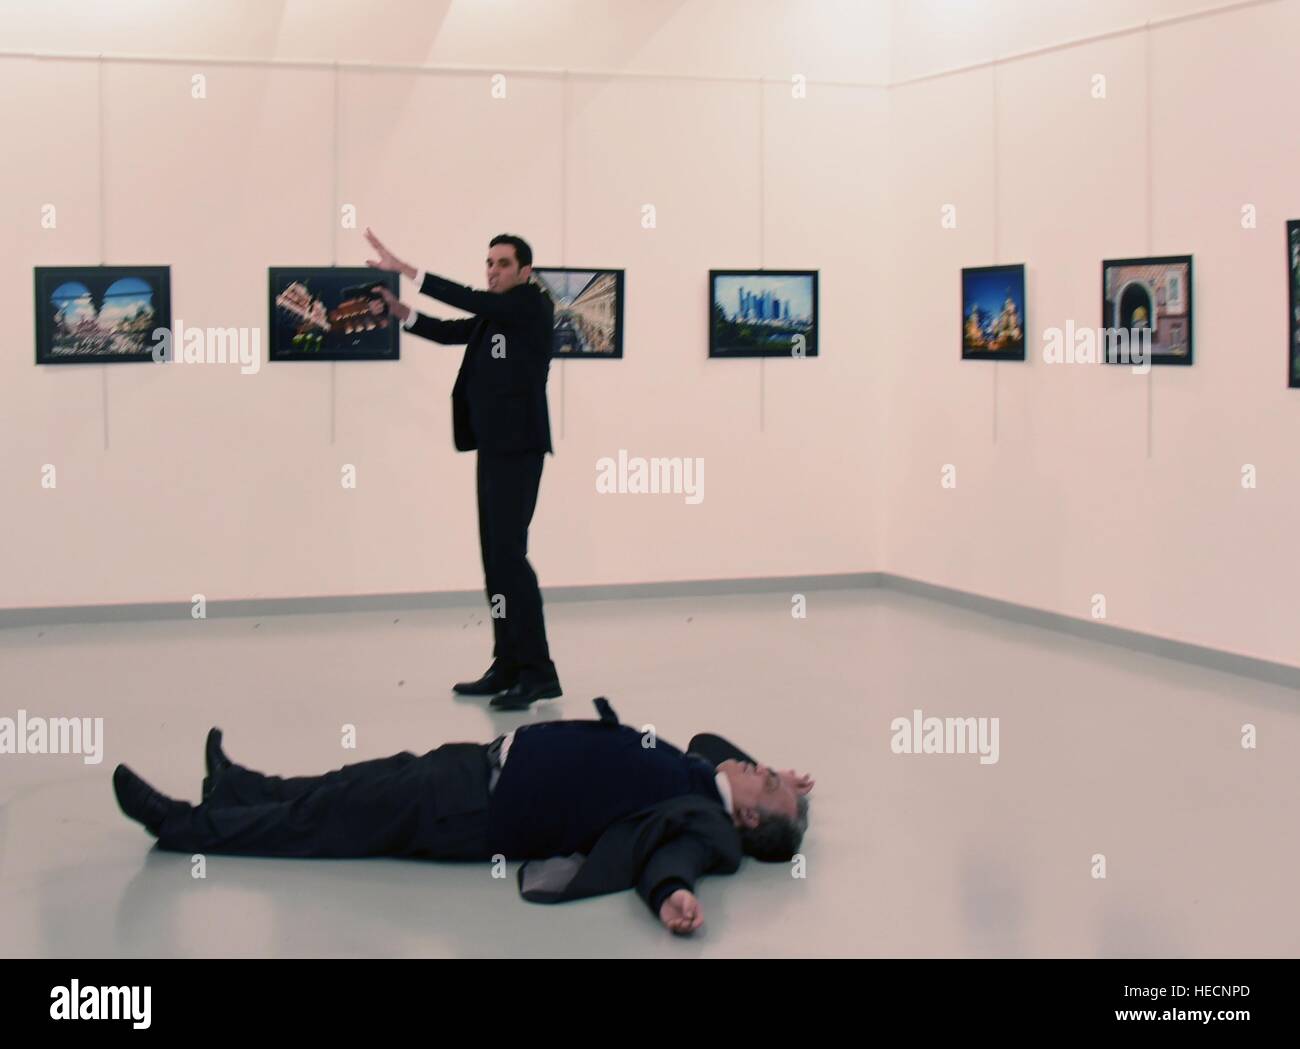 Ankara. 19th Dec, 2016. Photo taken on Dec. 19, 2016 shows the scene of the shooting attack in Ankara, Turkey. Russian Ambassador to Turkey Andrey Karlov was killed in a gunman attack at an art exhibition on Monday in Ankara, according to the Russian Foreign Ministry. © Xinhua/Alamy Live News Stock Photo